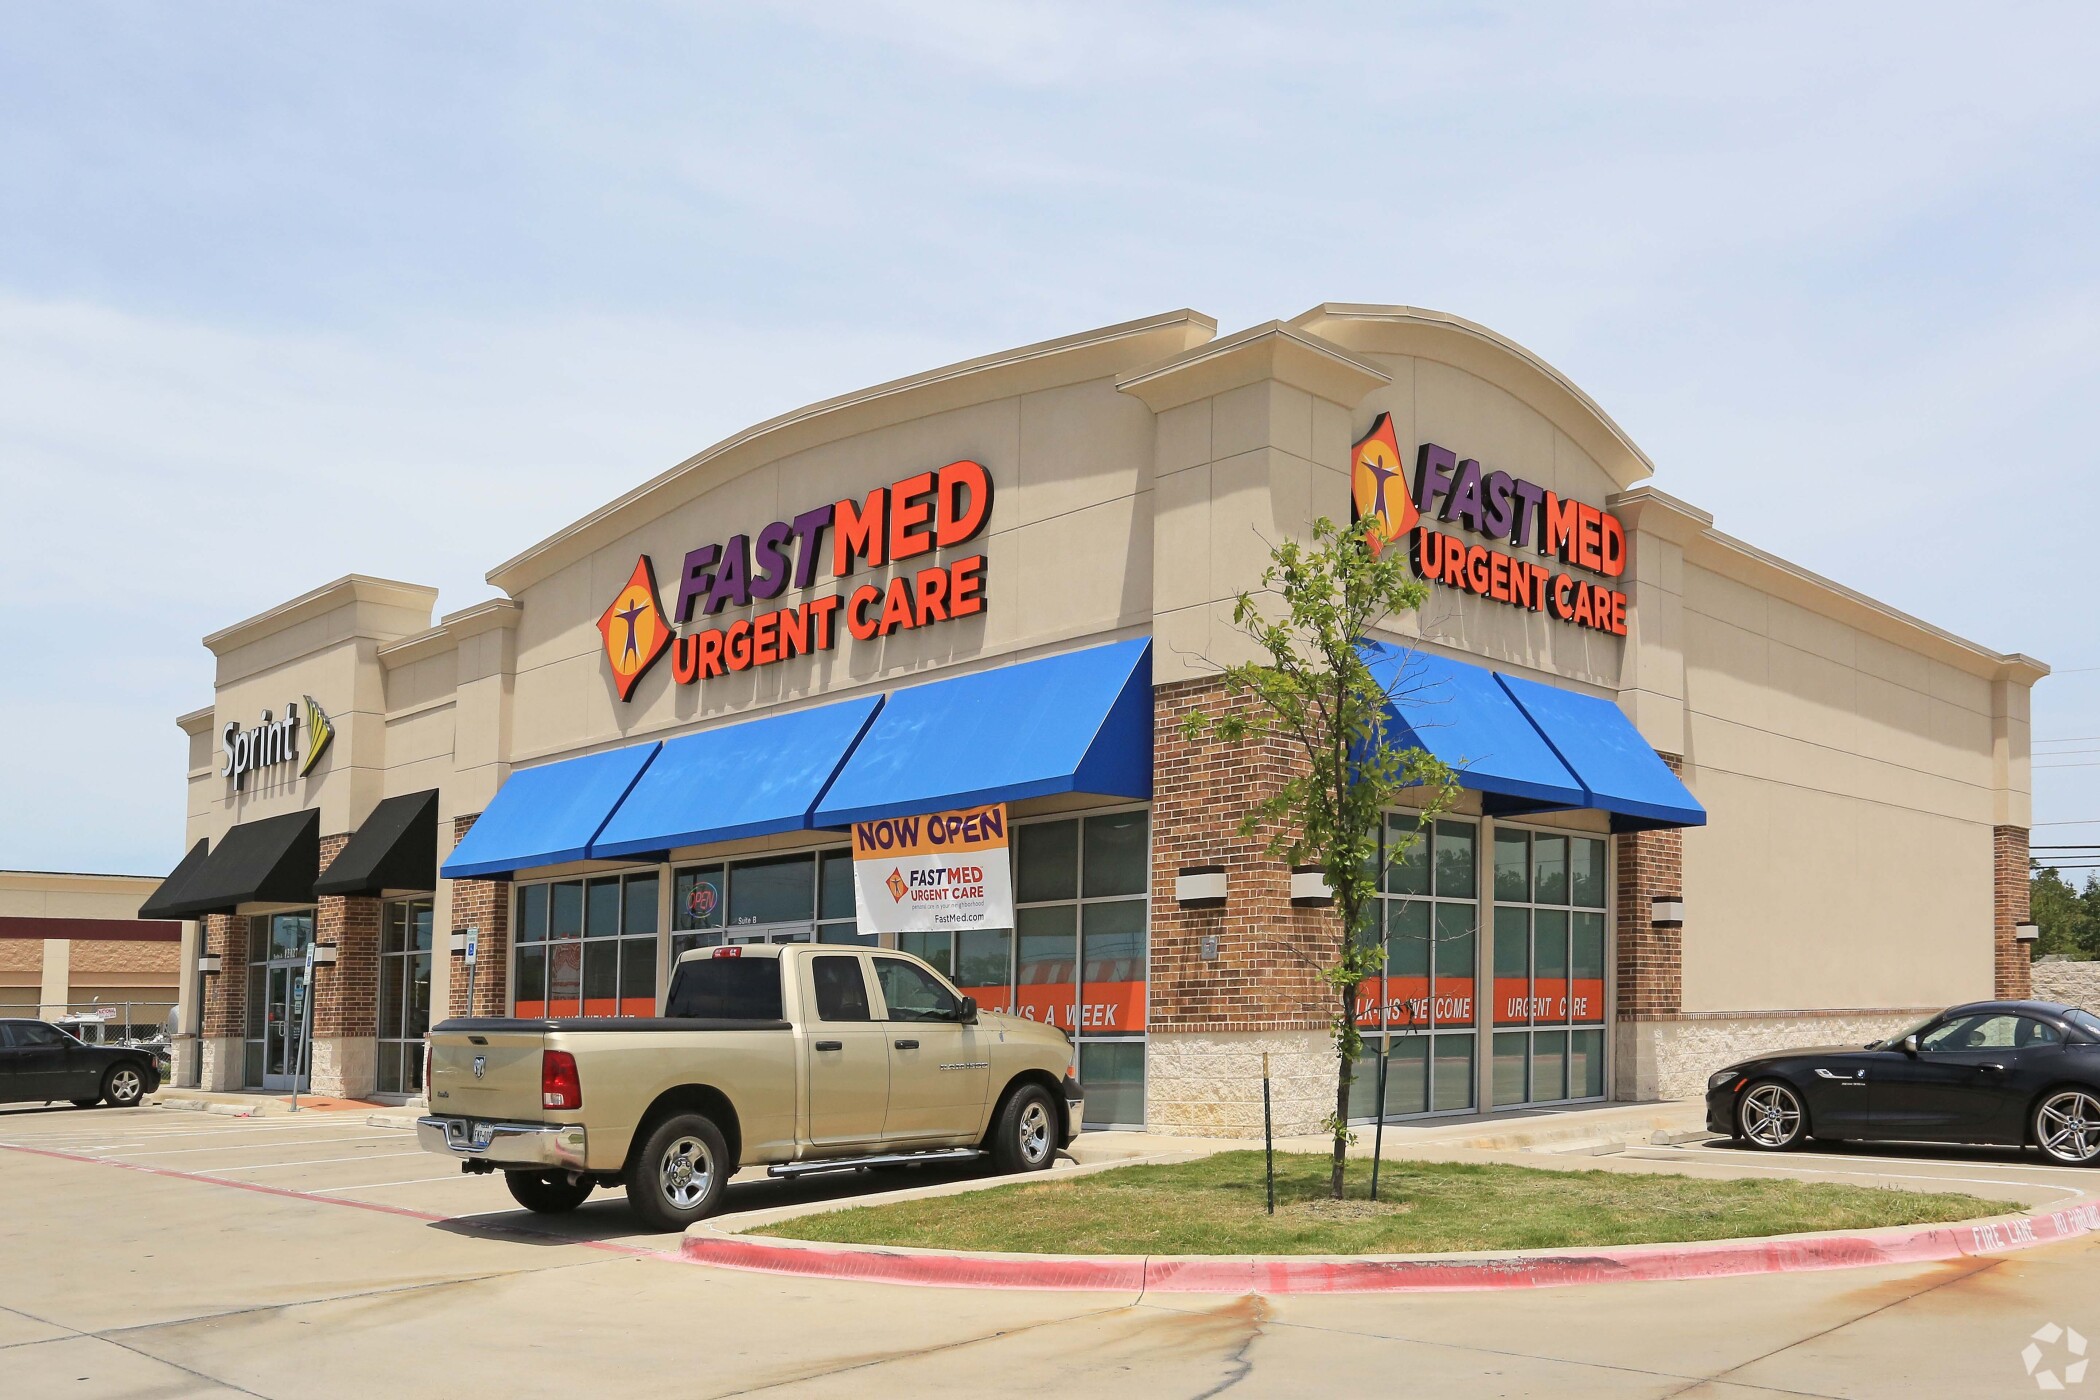 FastMed Urgent Care has a facility in a retail center (shown here) in Balch Springs, Texas, just east of Dallas. (Melissa Hood/CoStar)